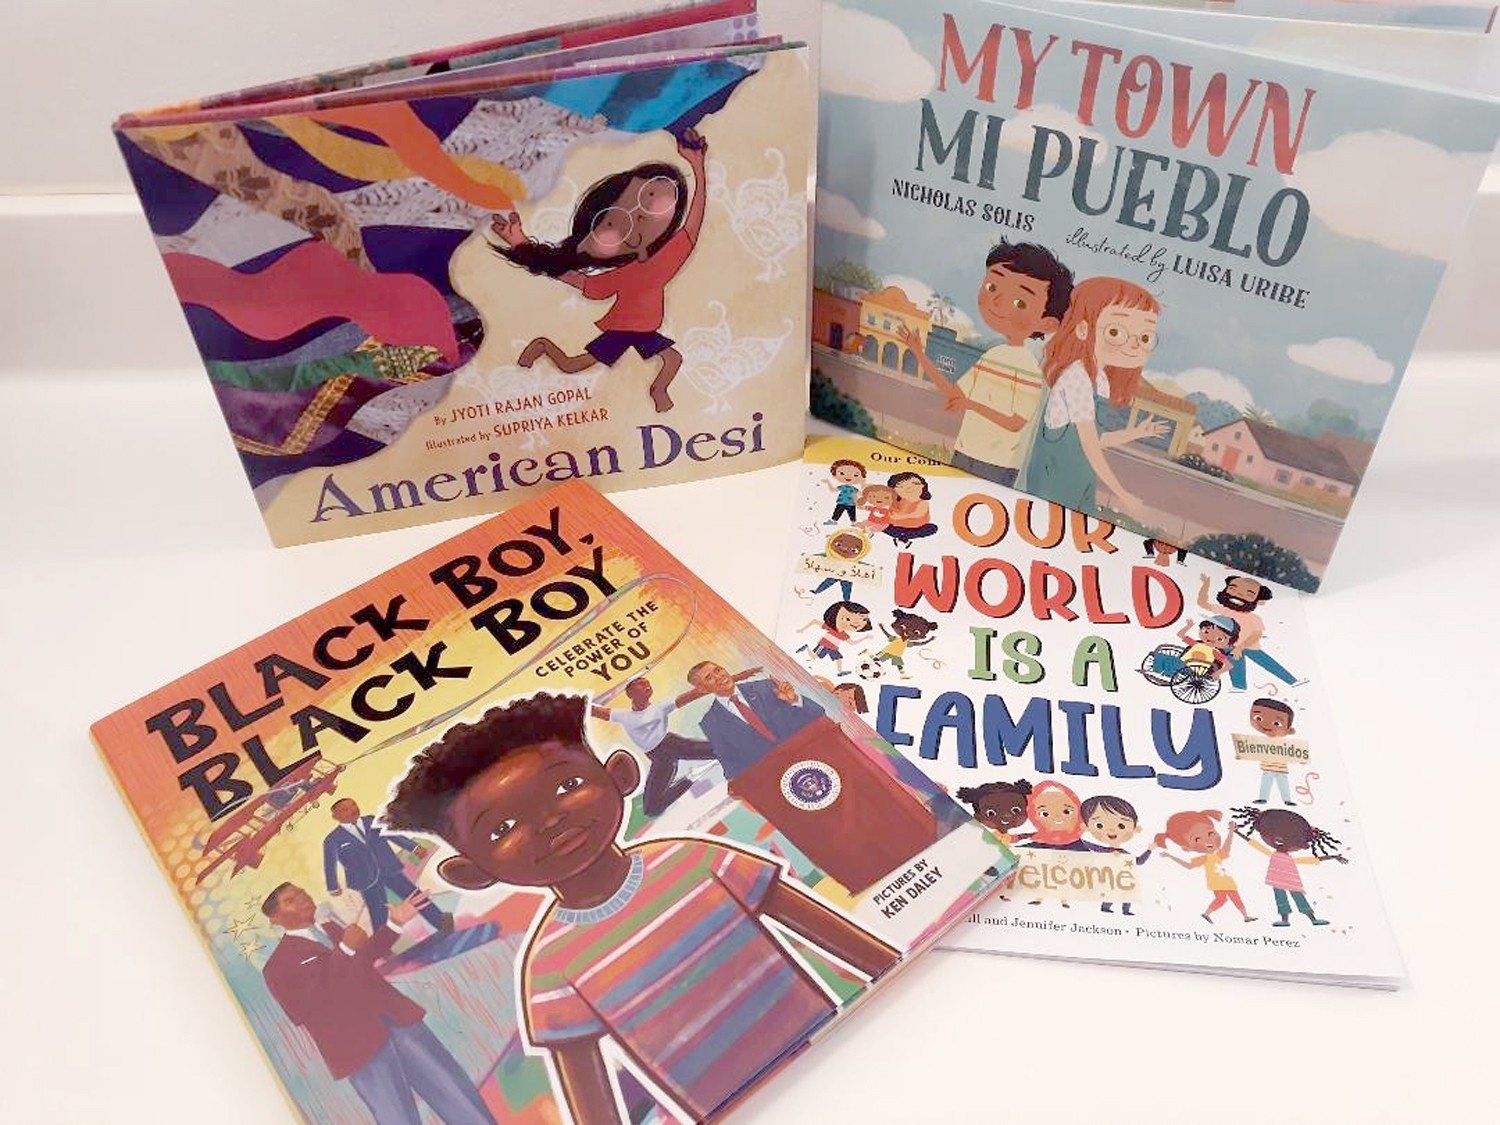 NDG Book Review: Great reads for kids on tolerance and inclusion